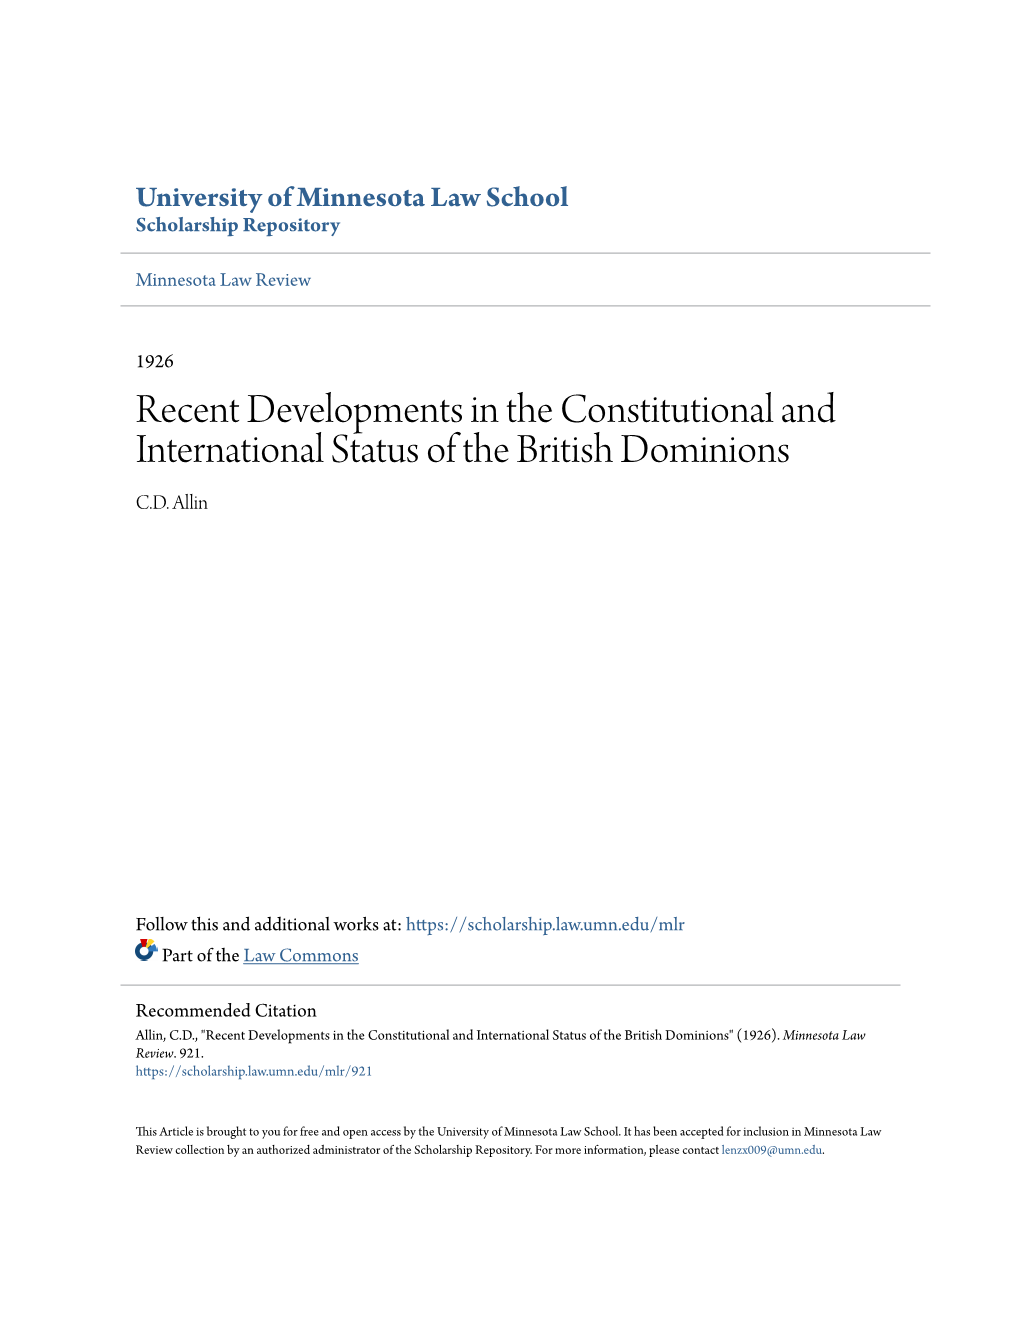 Recent Developments in the Constitutional and International Status of the British Dominions C.D